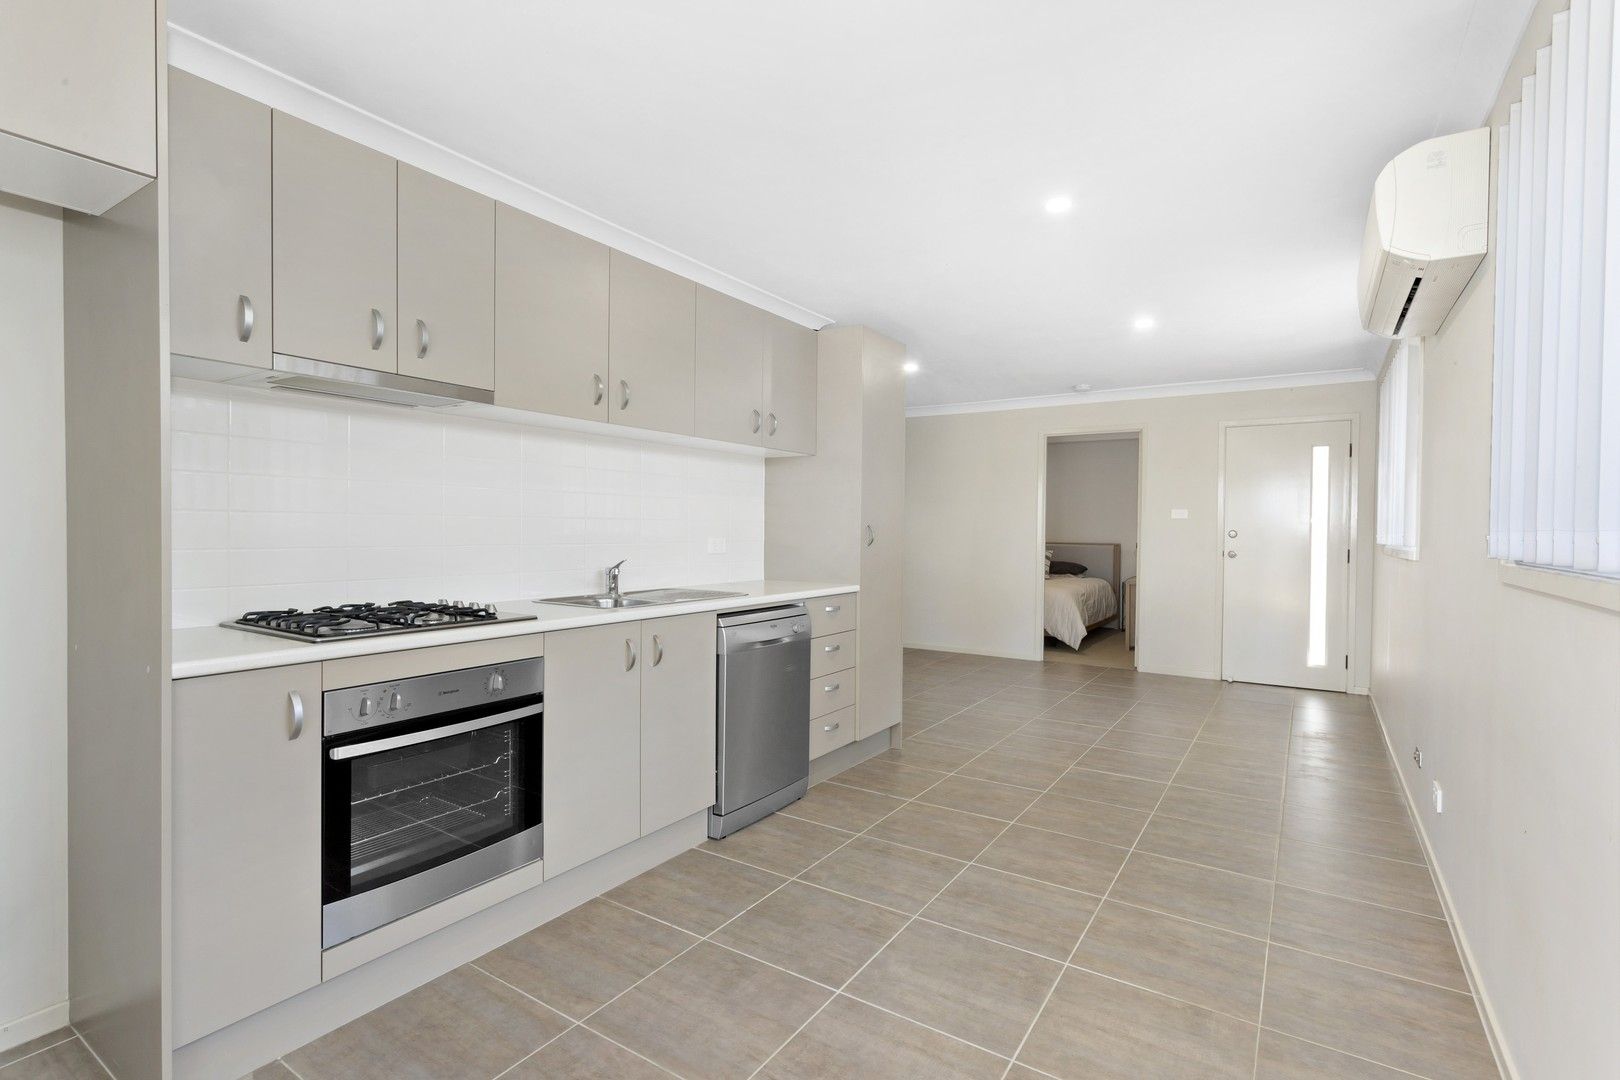 2 bedrooms Semi-Detached in 1/7 Glen Ayr Avenue CLIFTLEIGH NSW, 2321